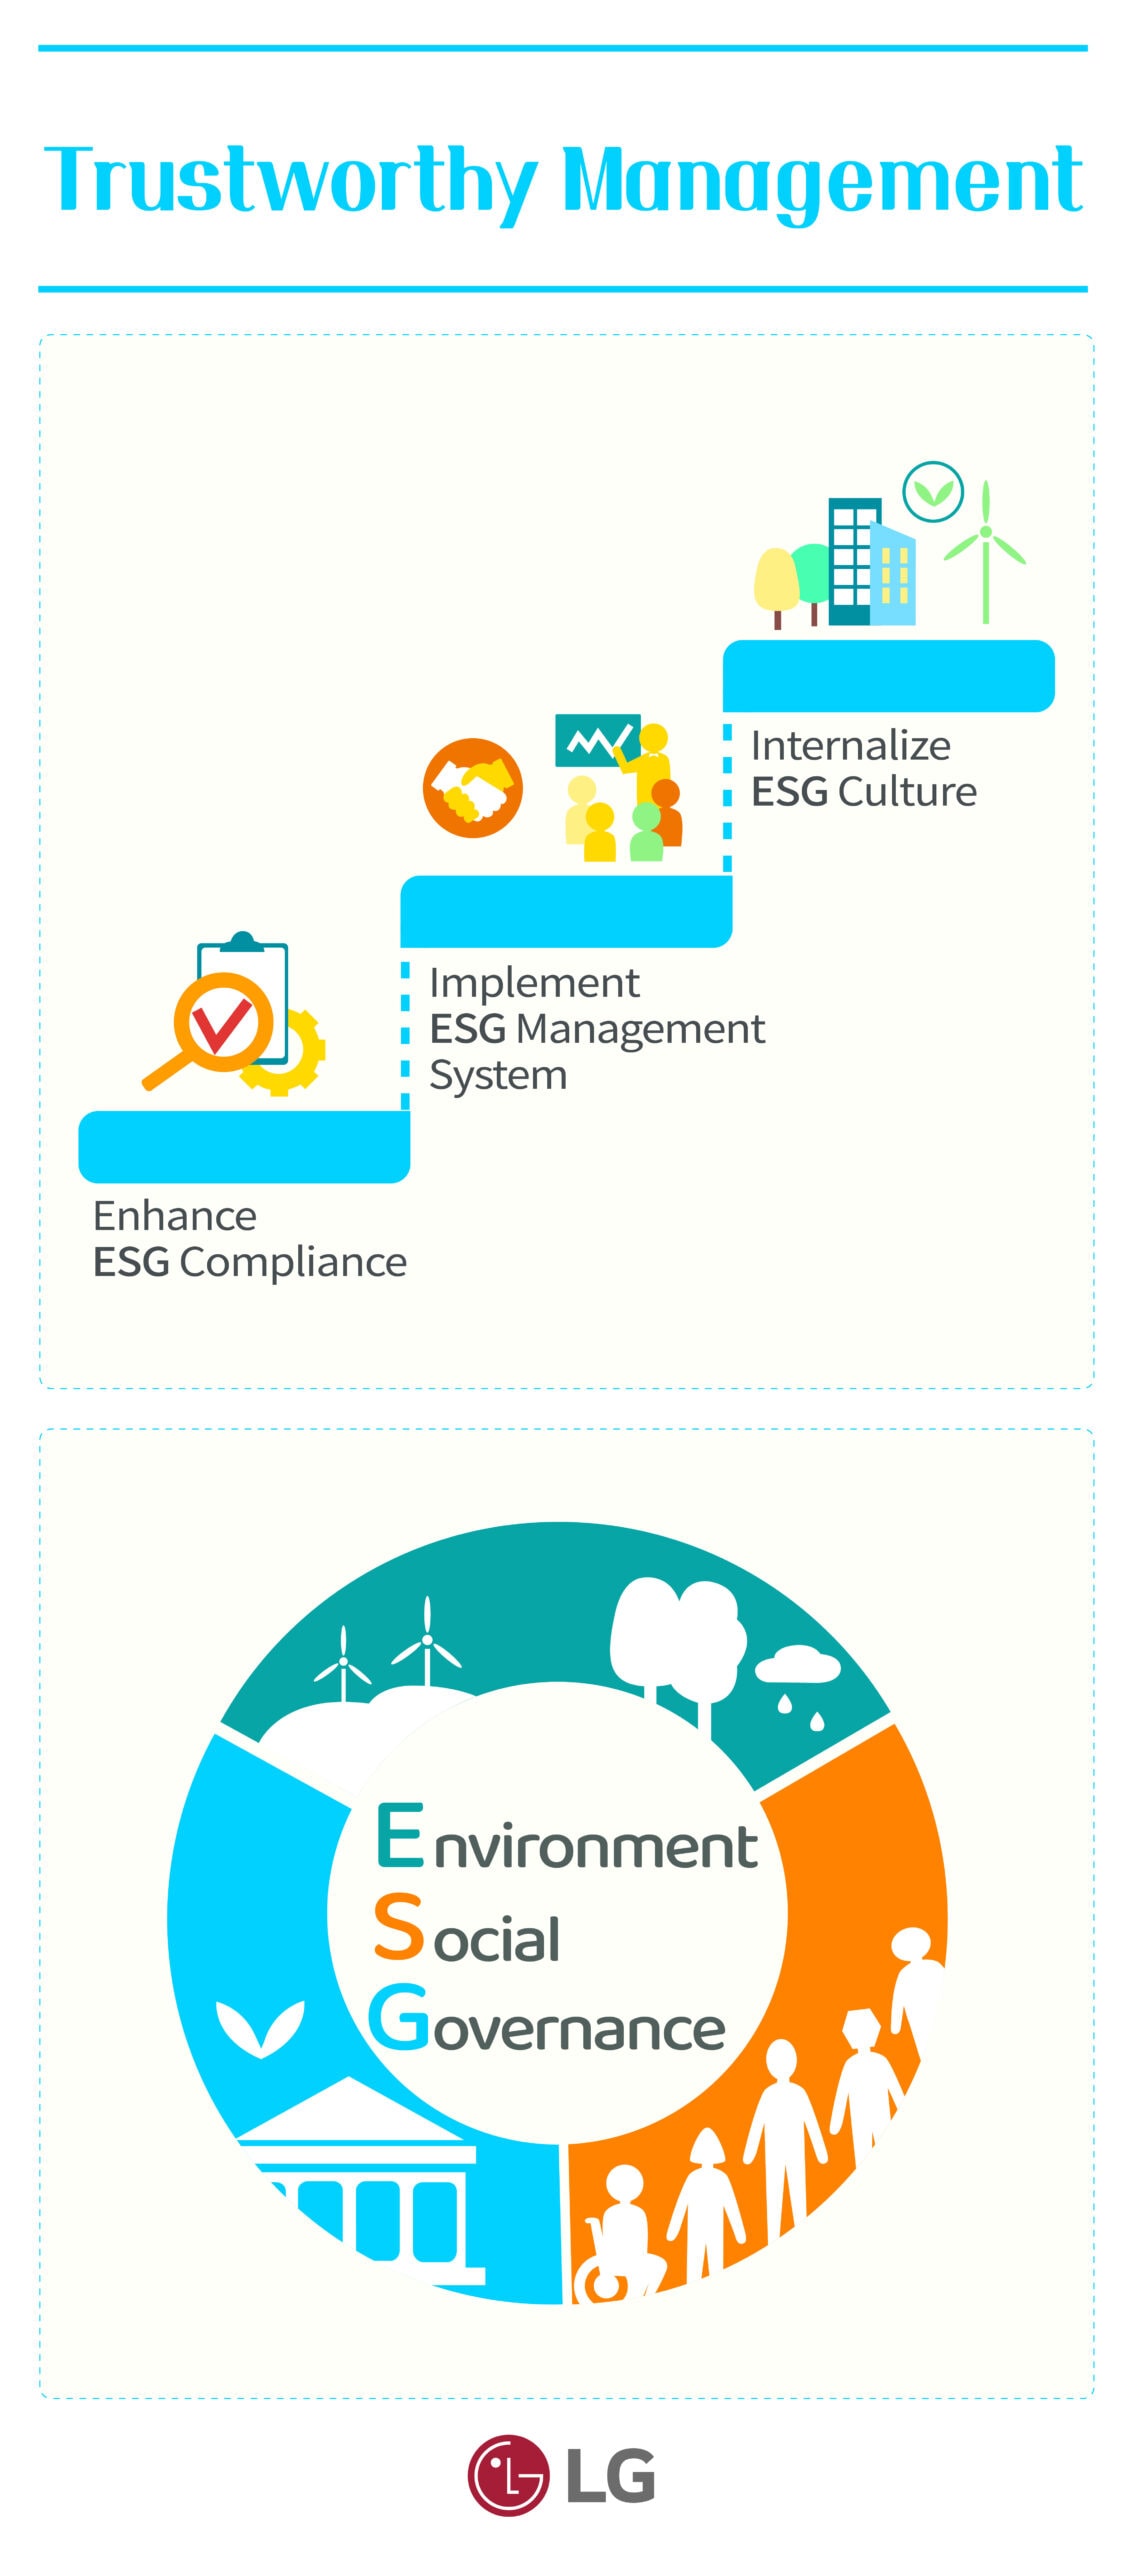 An illustration explaining 'trustworthy management' which is one of LG’s key ESG priorities